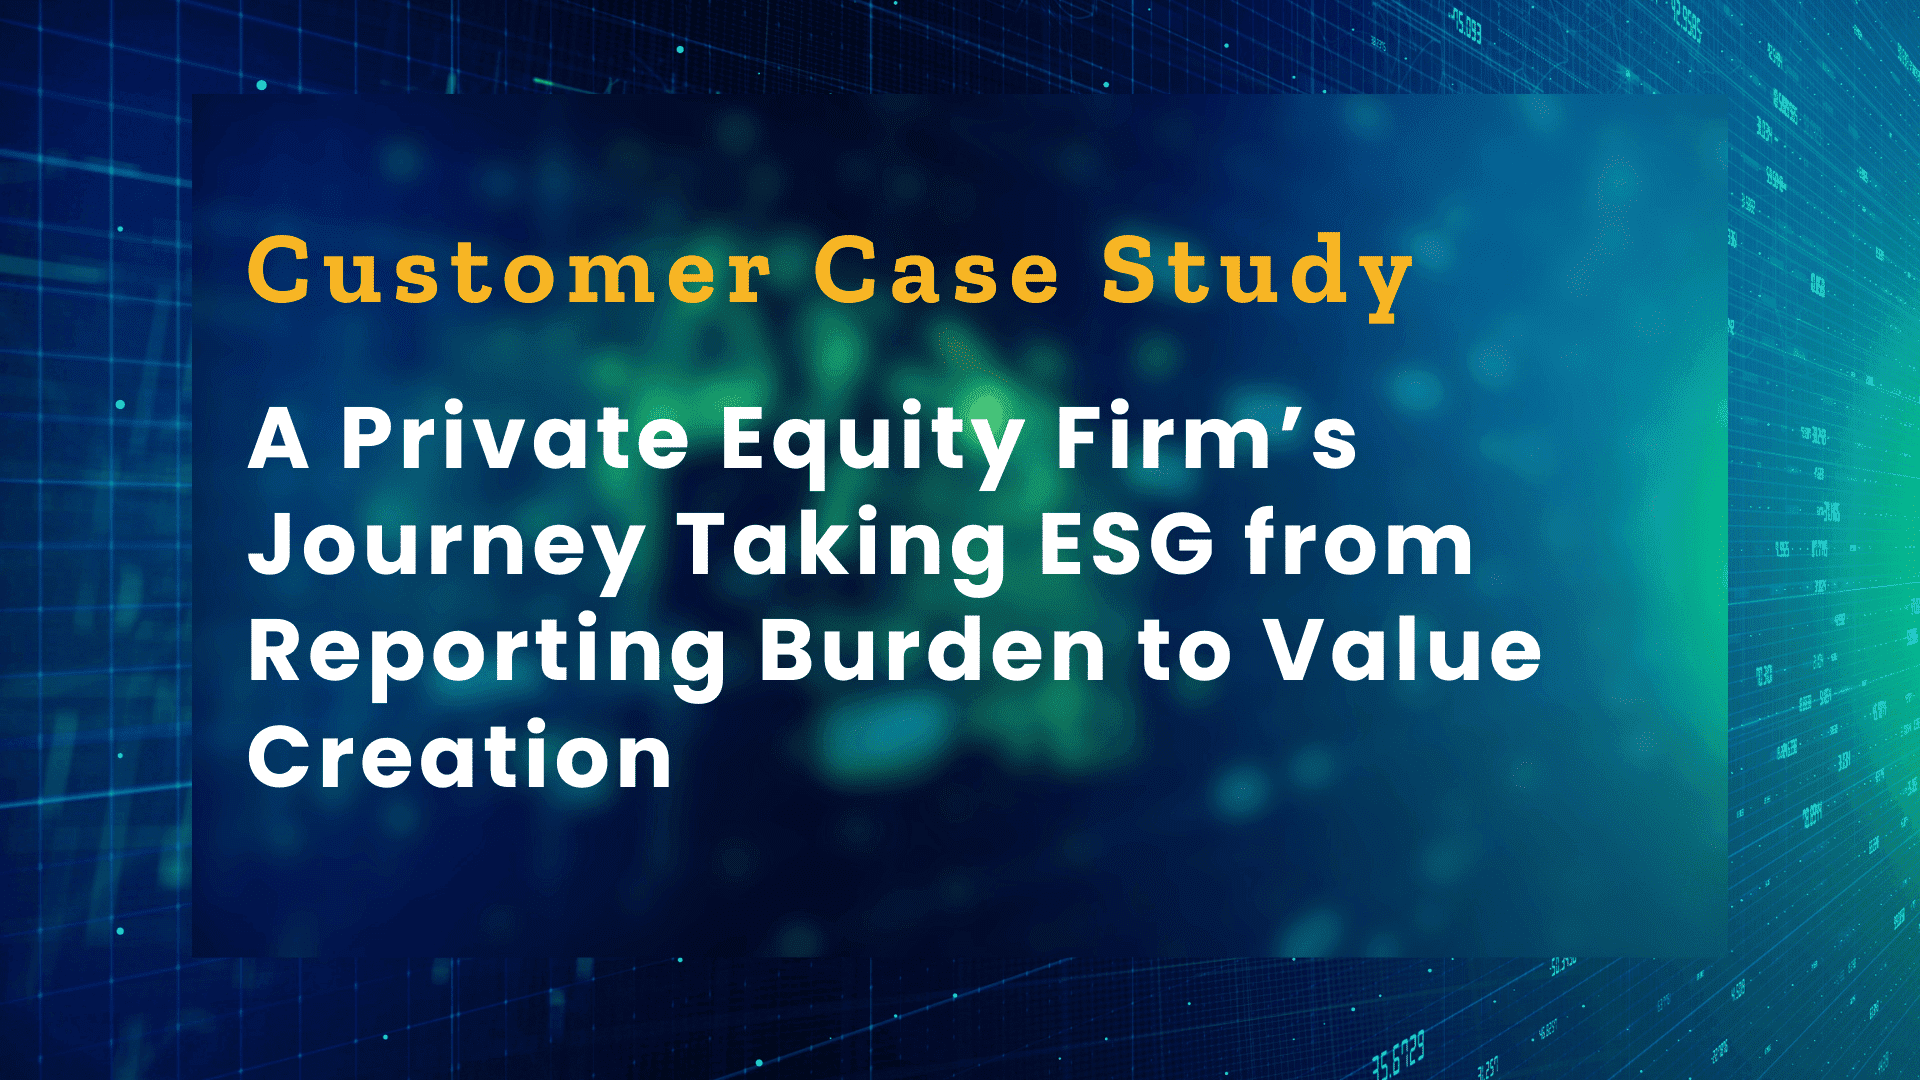 A Private Equity Firm’s Journey Taking ESG from Reporting Burden to Value Creation